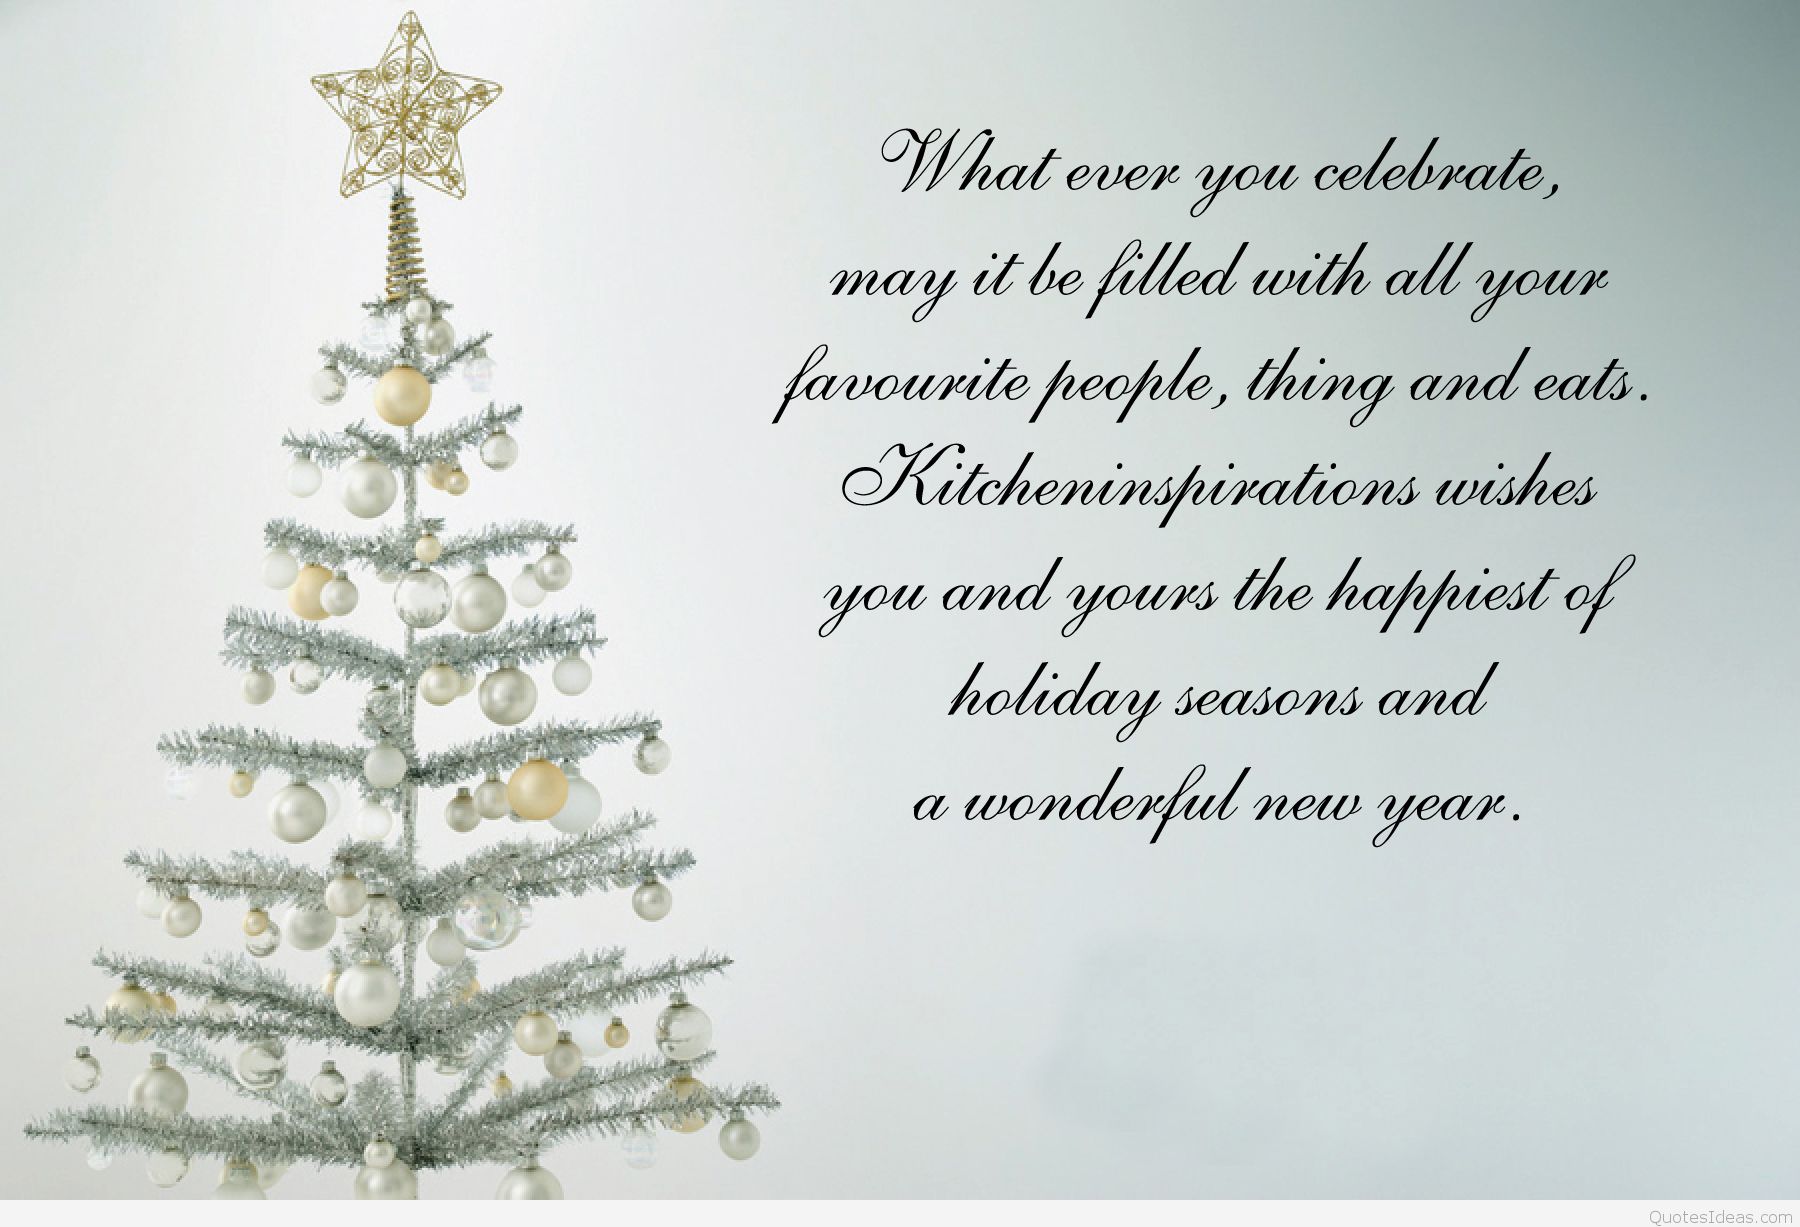 Christmas Eve Quotes - HD Wallpaper 